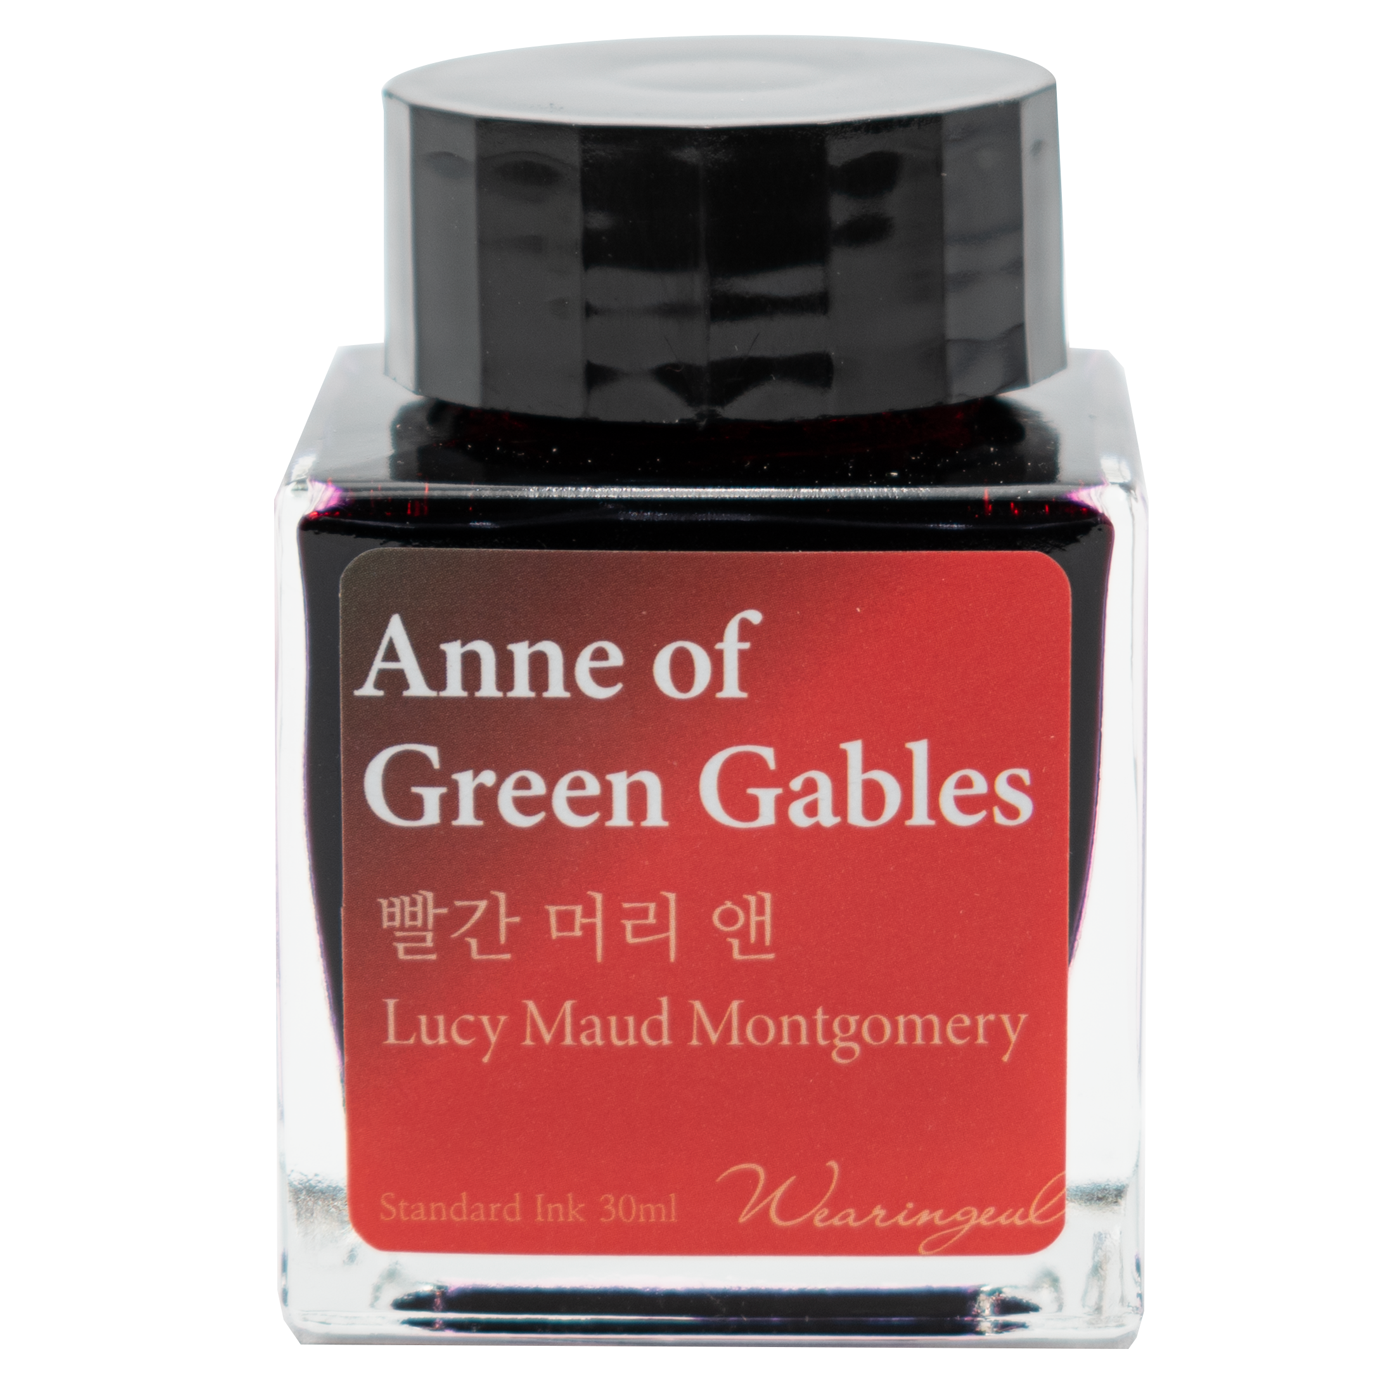 Wearingeul - Lucy Maud Montgomery - Anne of Green Gables